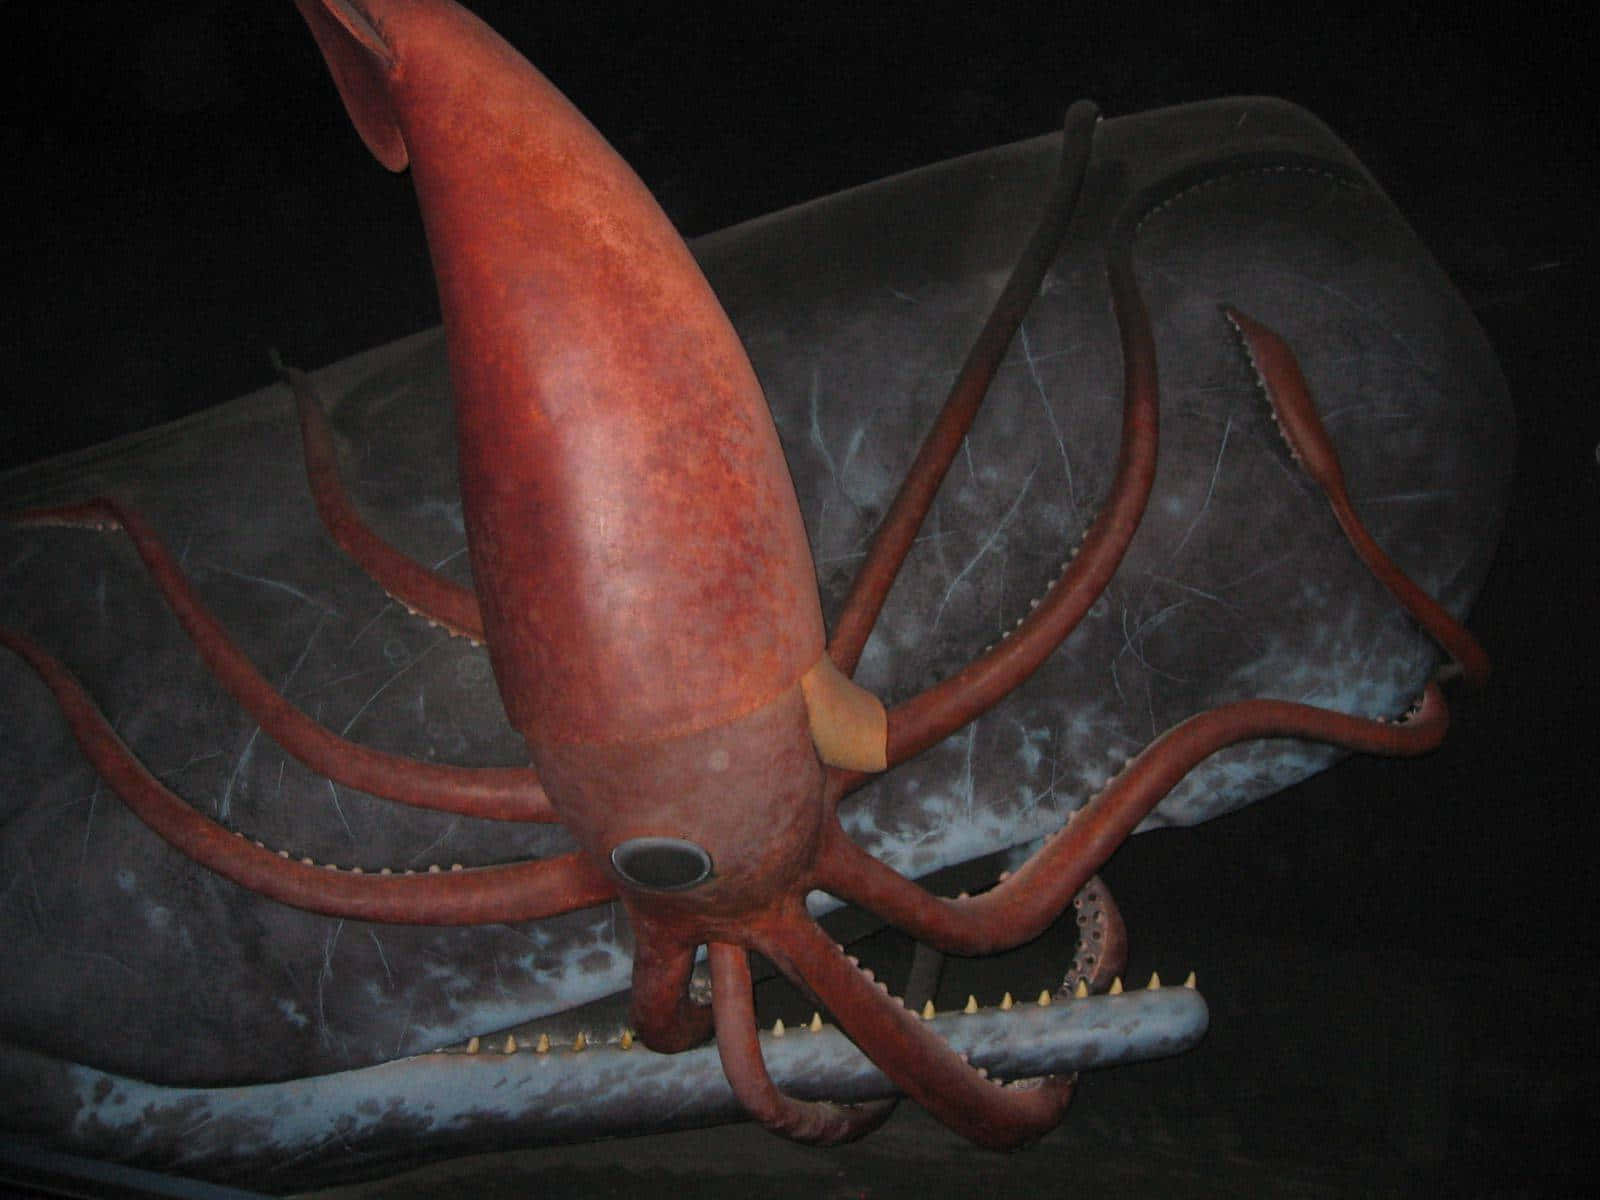 A rare glimpse of a giant squid